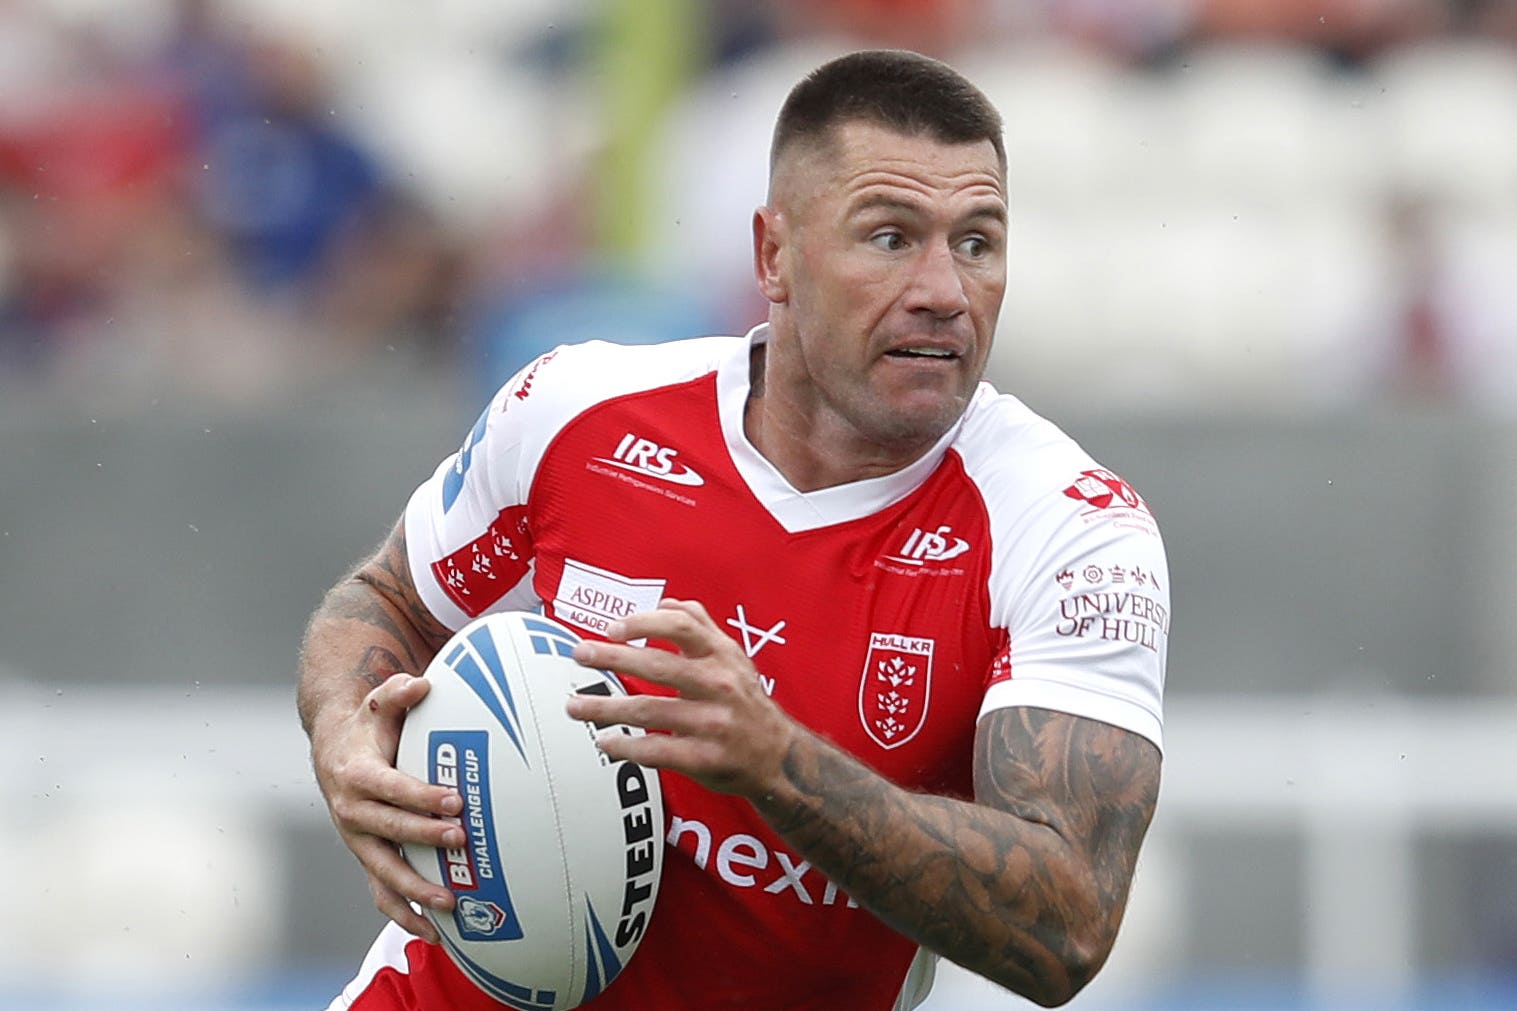 Hull KR captain Shaun Kenny-Dowall hoping to top off career with Wembley win NewsChain